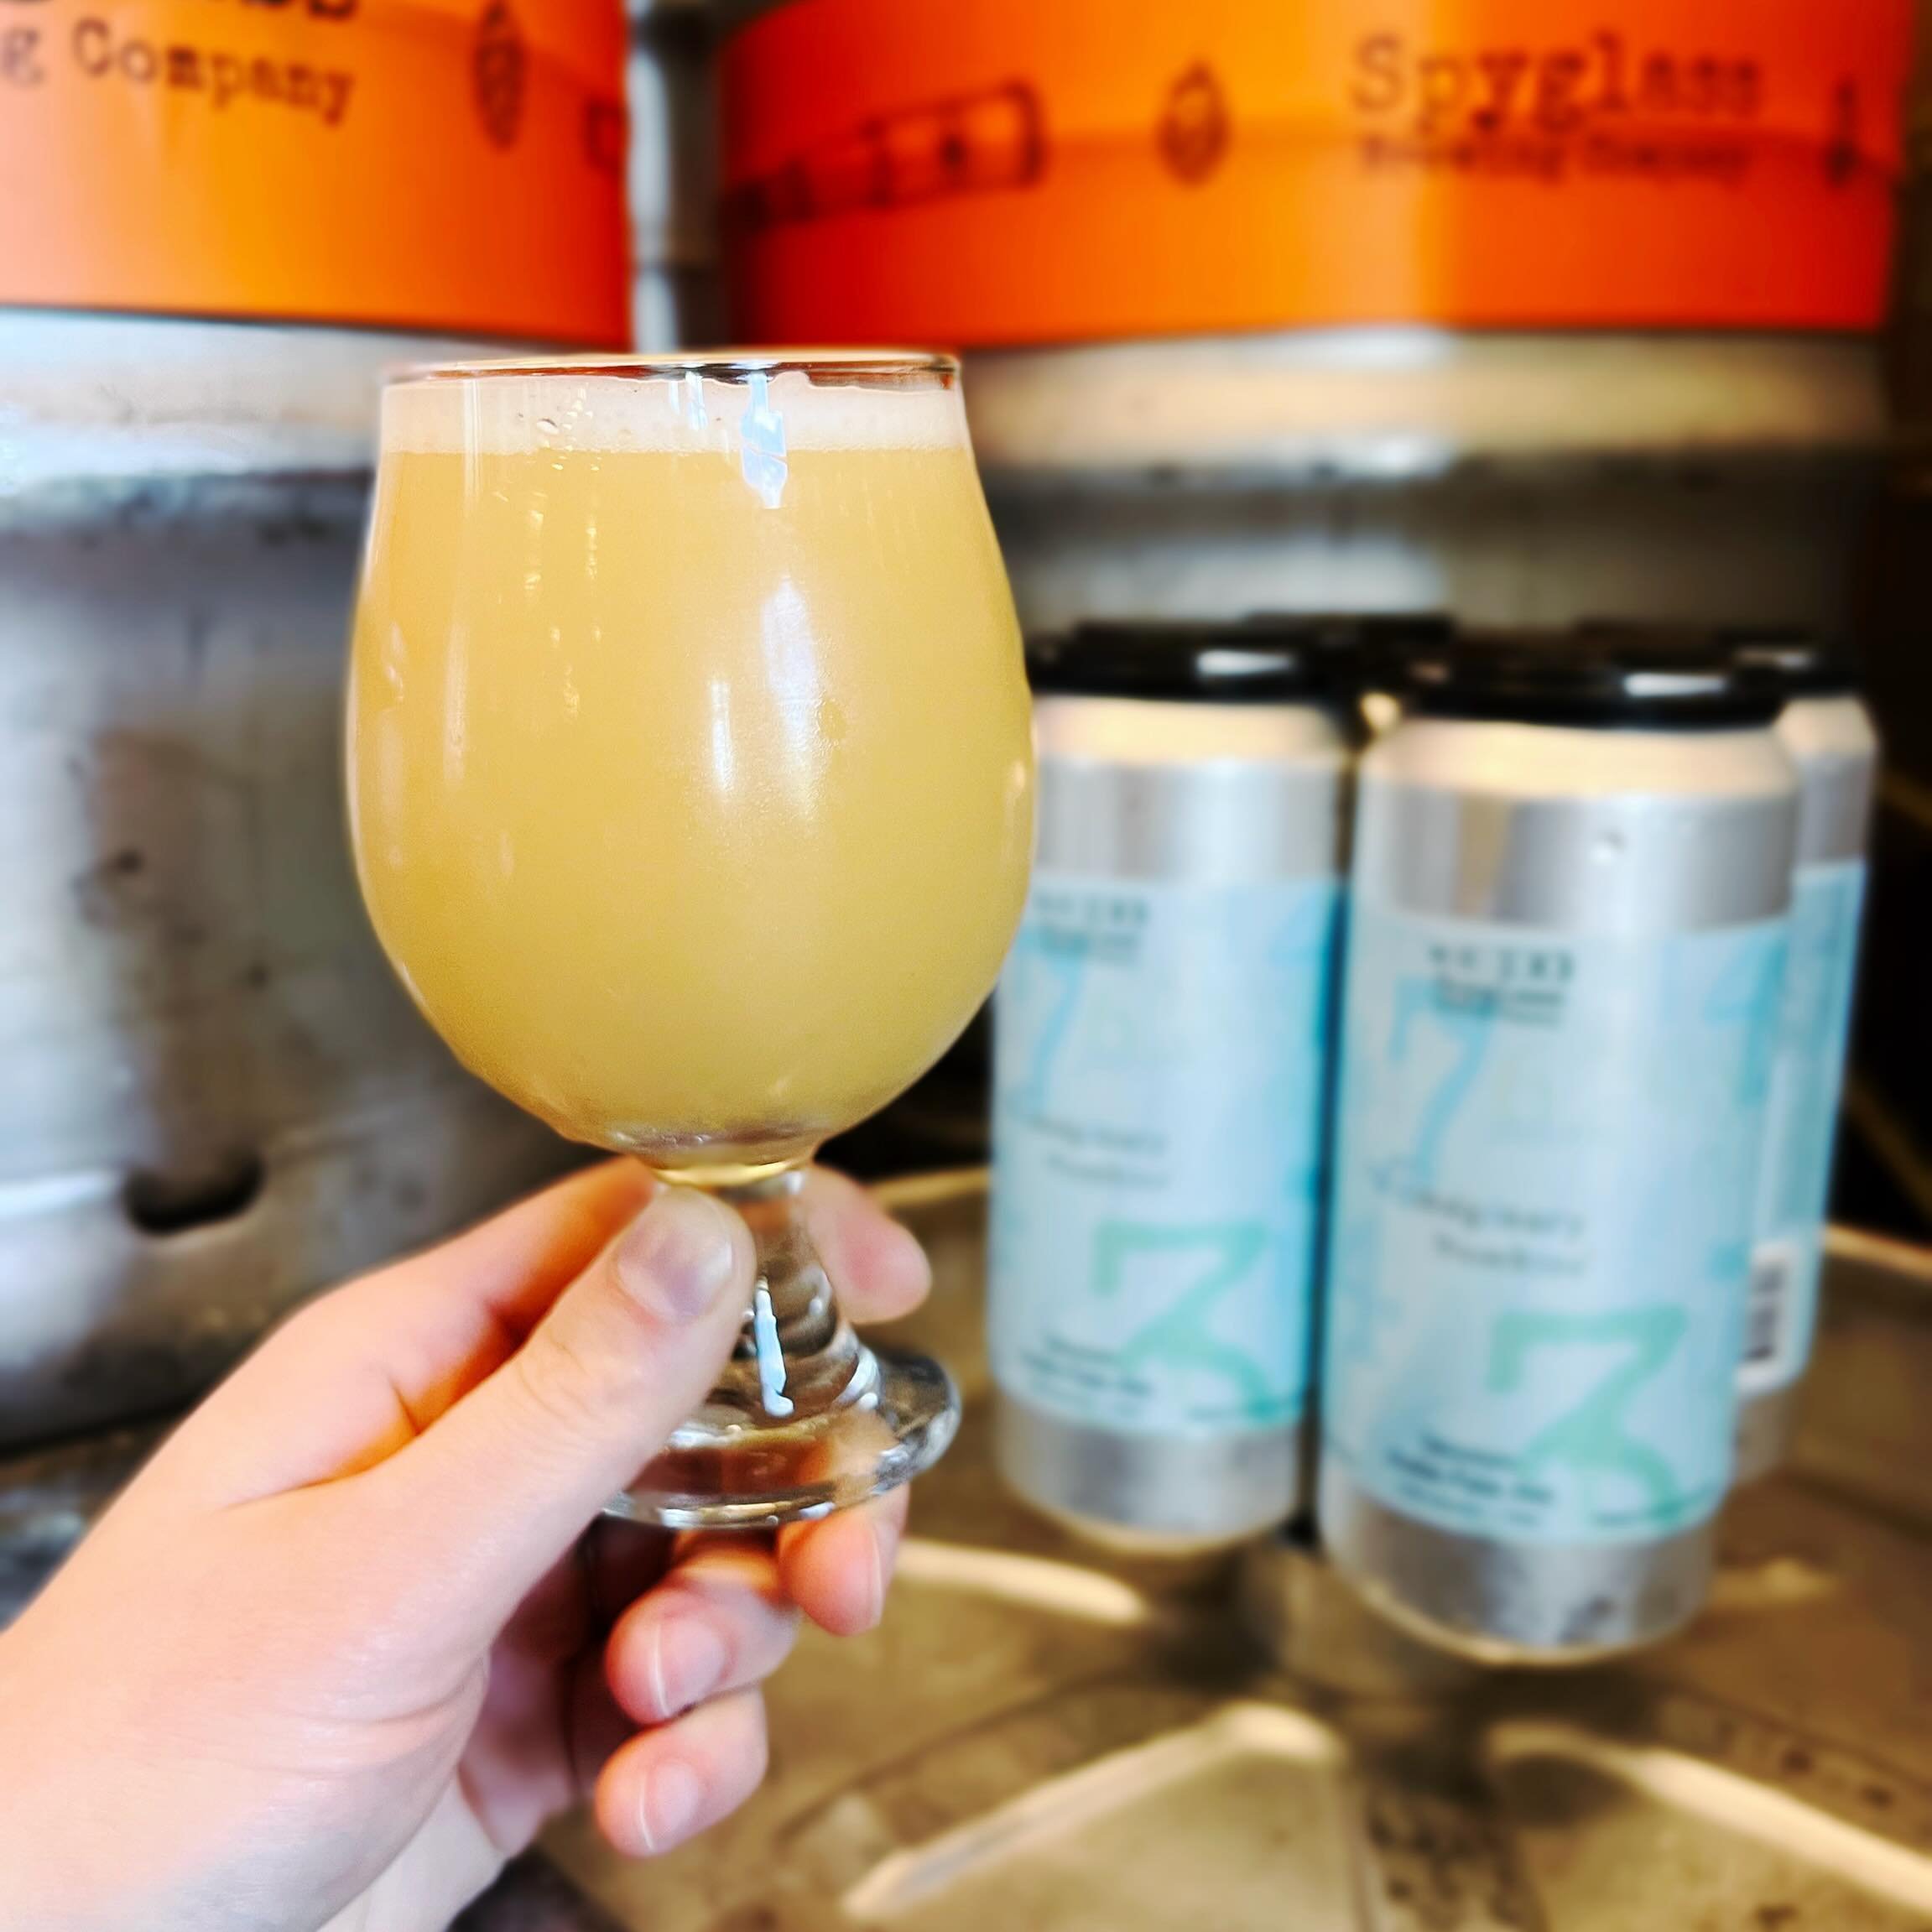 🔢 Imaginary Numbers 🍻

A 5% ABV Session IPA with Citra, Rakau, and Cashmere hops that nearly dance right out the glass! We get musings of key lime meringue, citrus punch, and subtle earthy bitterness of fresh timber. This is the beer you&rsquo;ll b